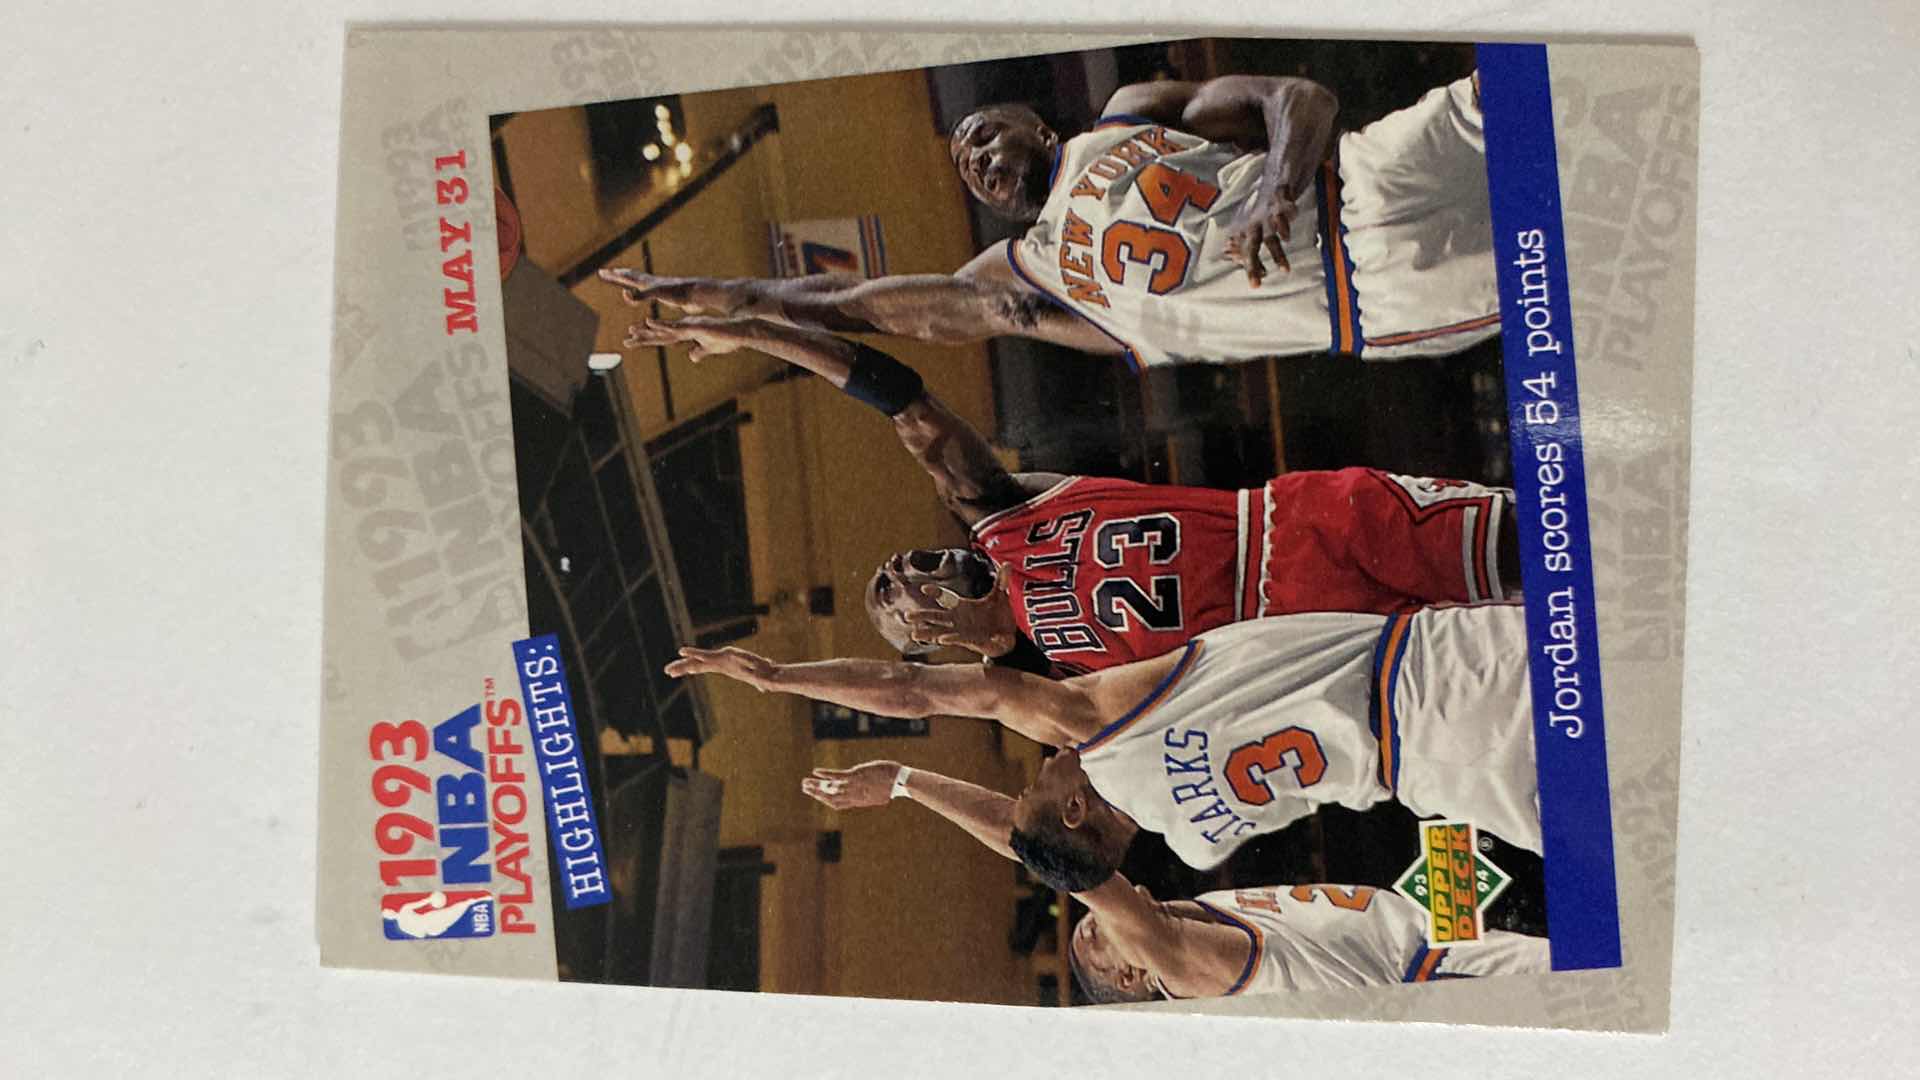 Photo 3 of 6 COLLECTIBLE BASKETBALL CARDS - 5 ARE MICHAEL JORDAN